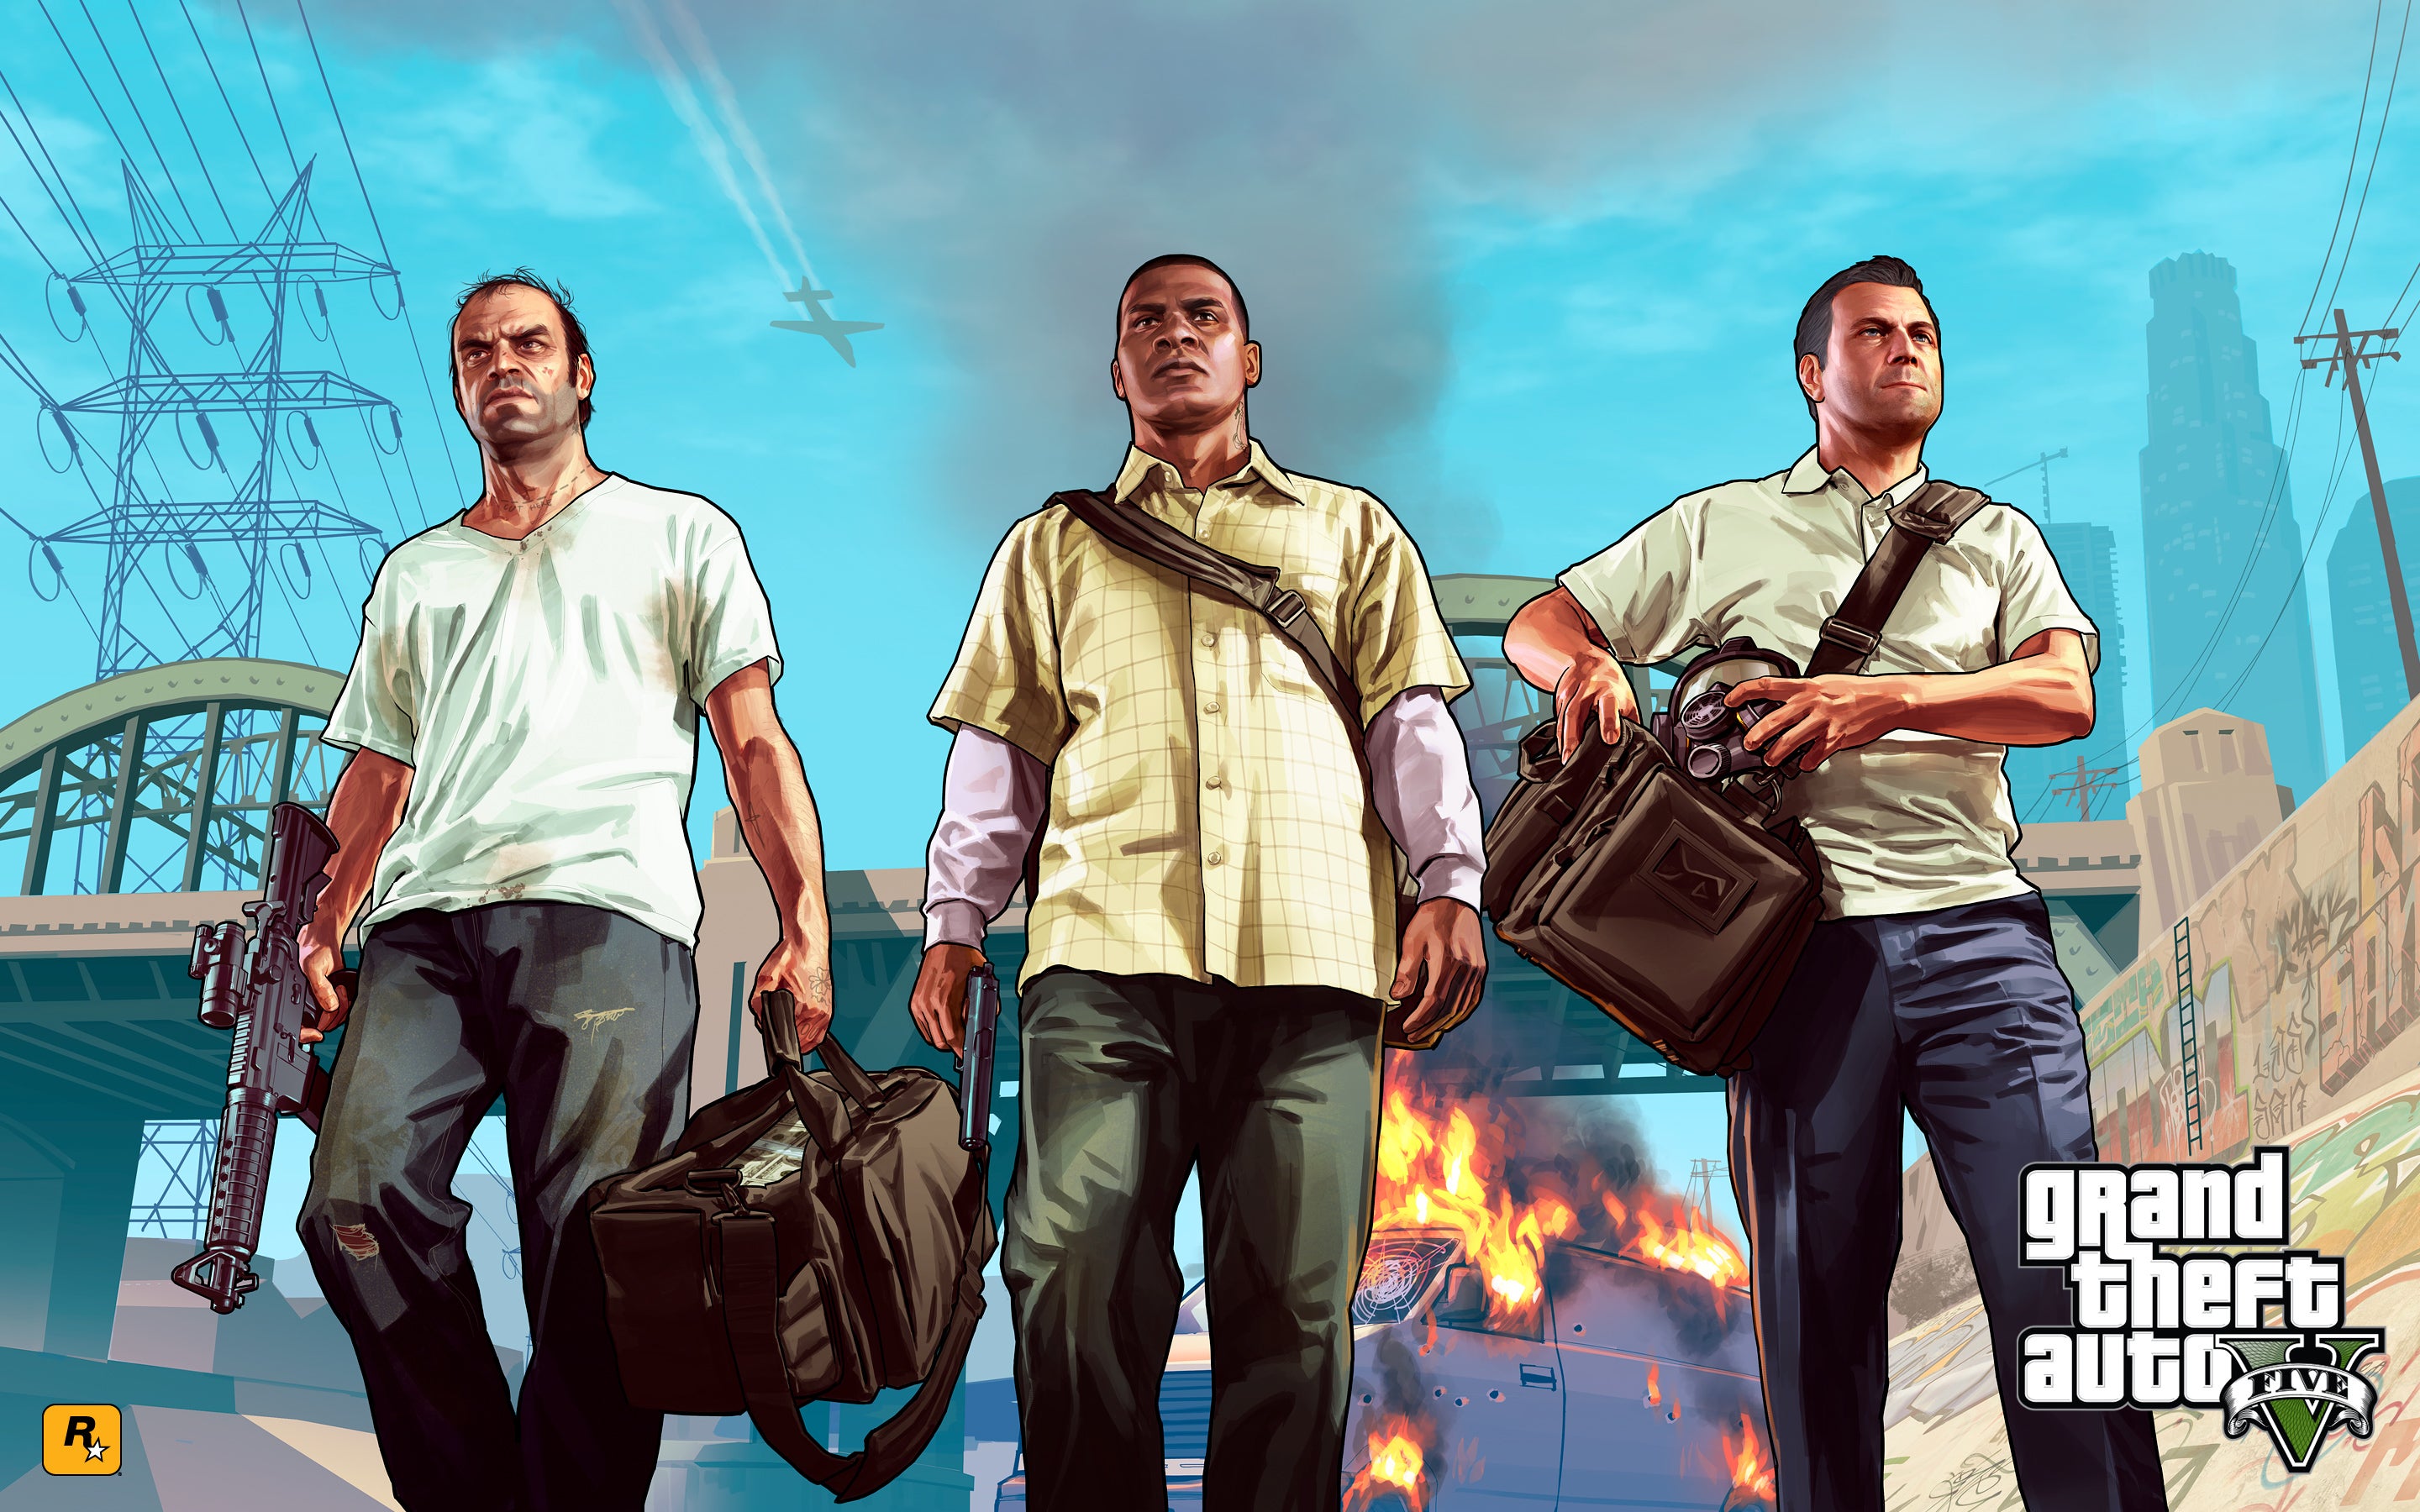 characters on grand theft auto 5